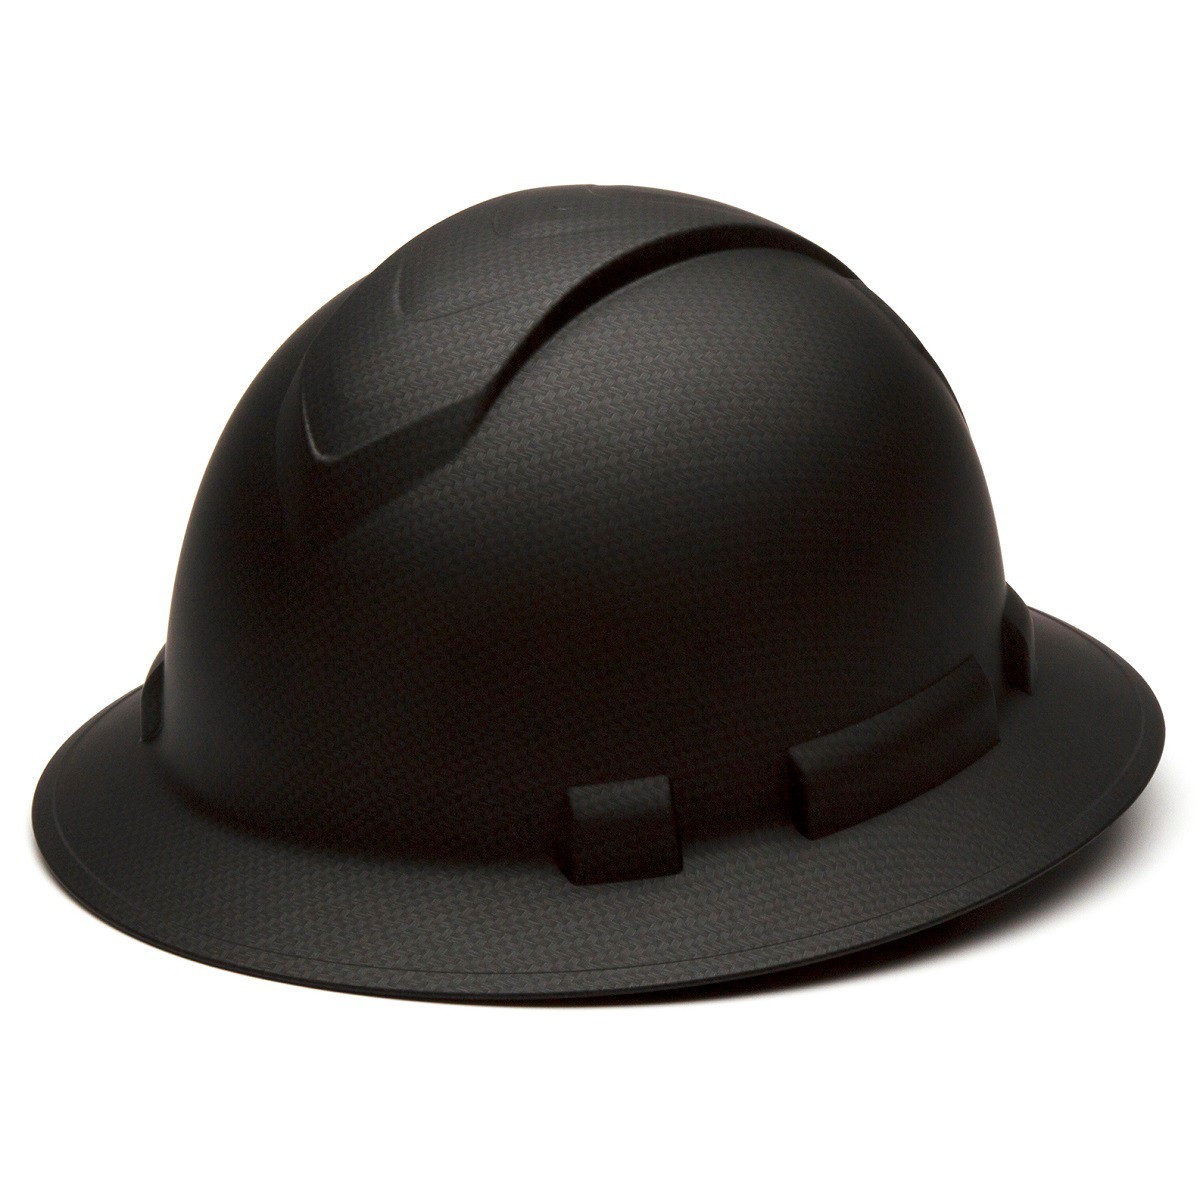 Pyramex Ridgeline Full Brim Hard Hat with 4 Point Ratchet Suspension from Columbia Safety